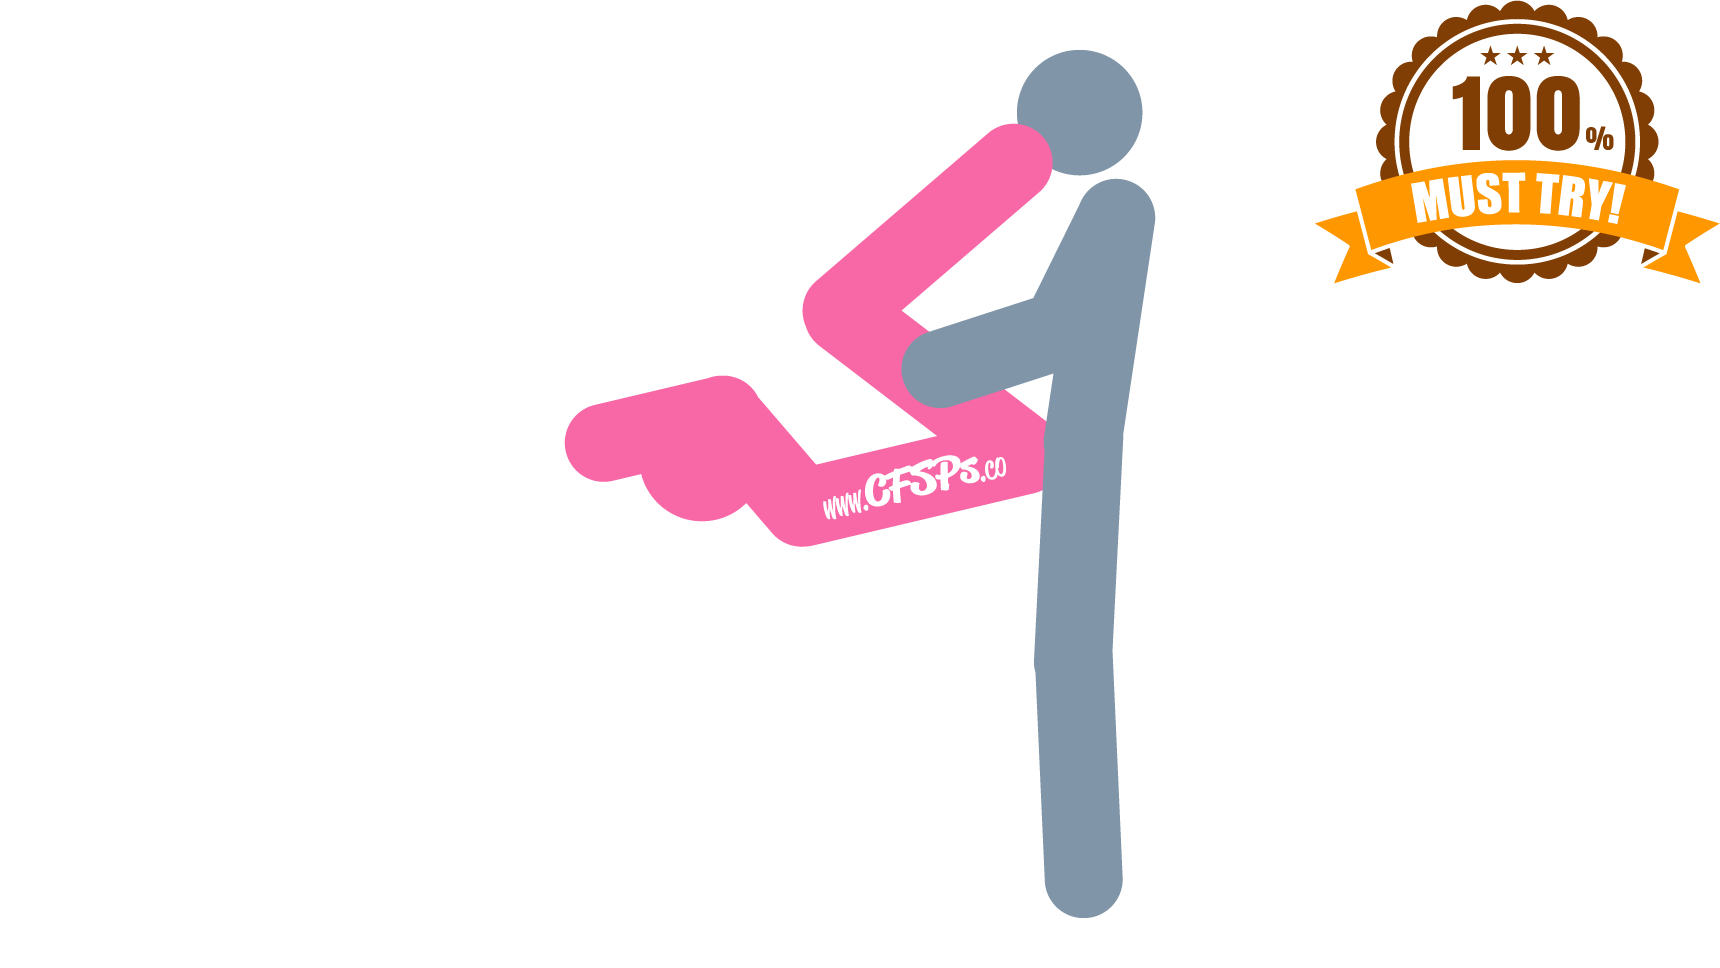 This stick figure image depicts a man and woman having sex in the Armrest Yes sex position. The woman is lying on the recliner or sofa with her butt on the armrest and her body on the seat cushion. Her legs are up in the air, and her knees are slightly bent. The man is standing near the armrest, holding her legs for support.